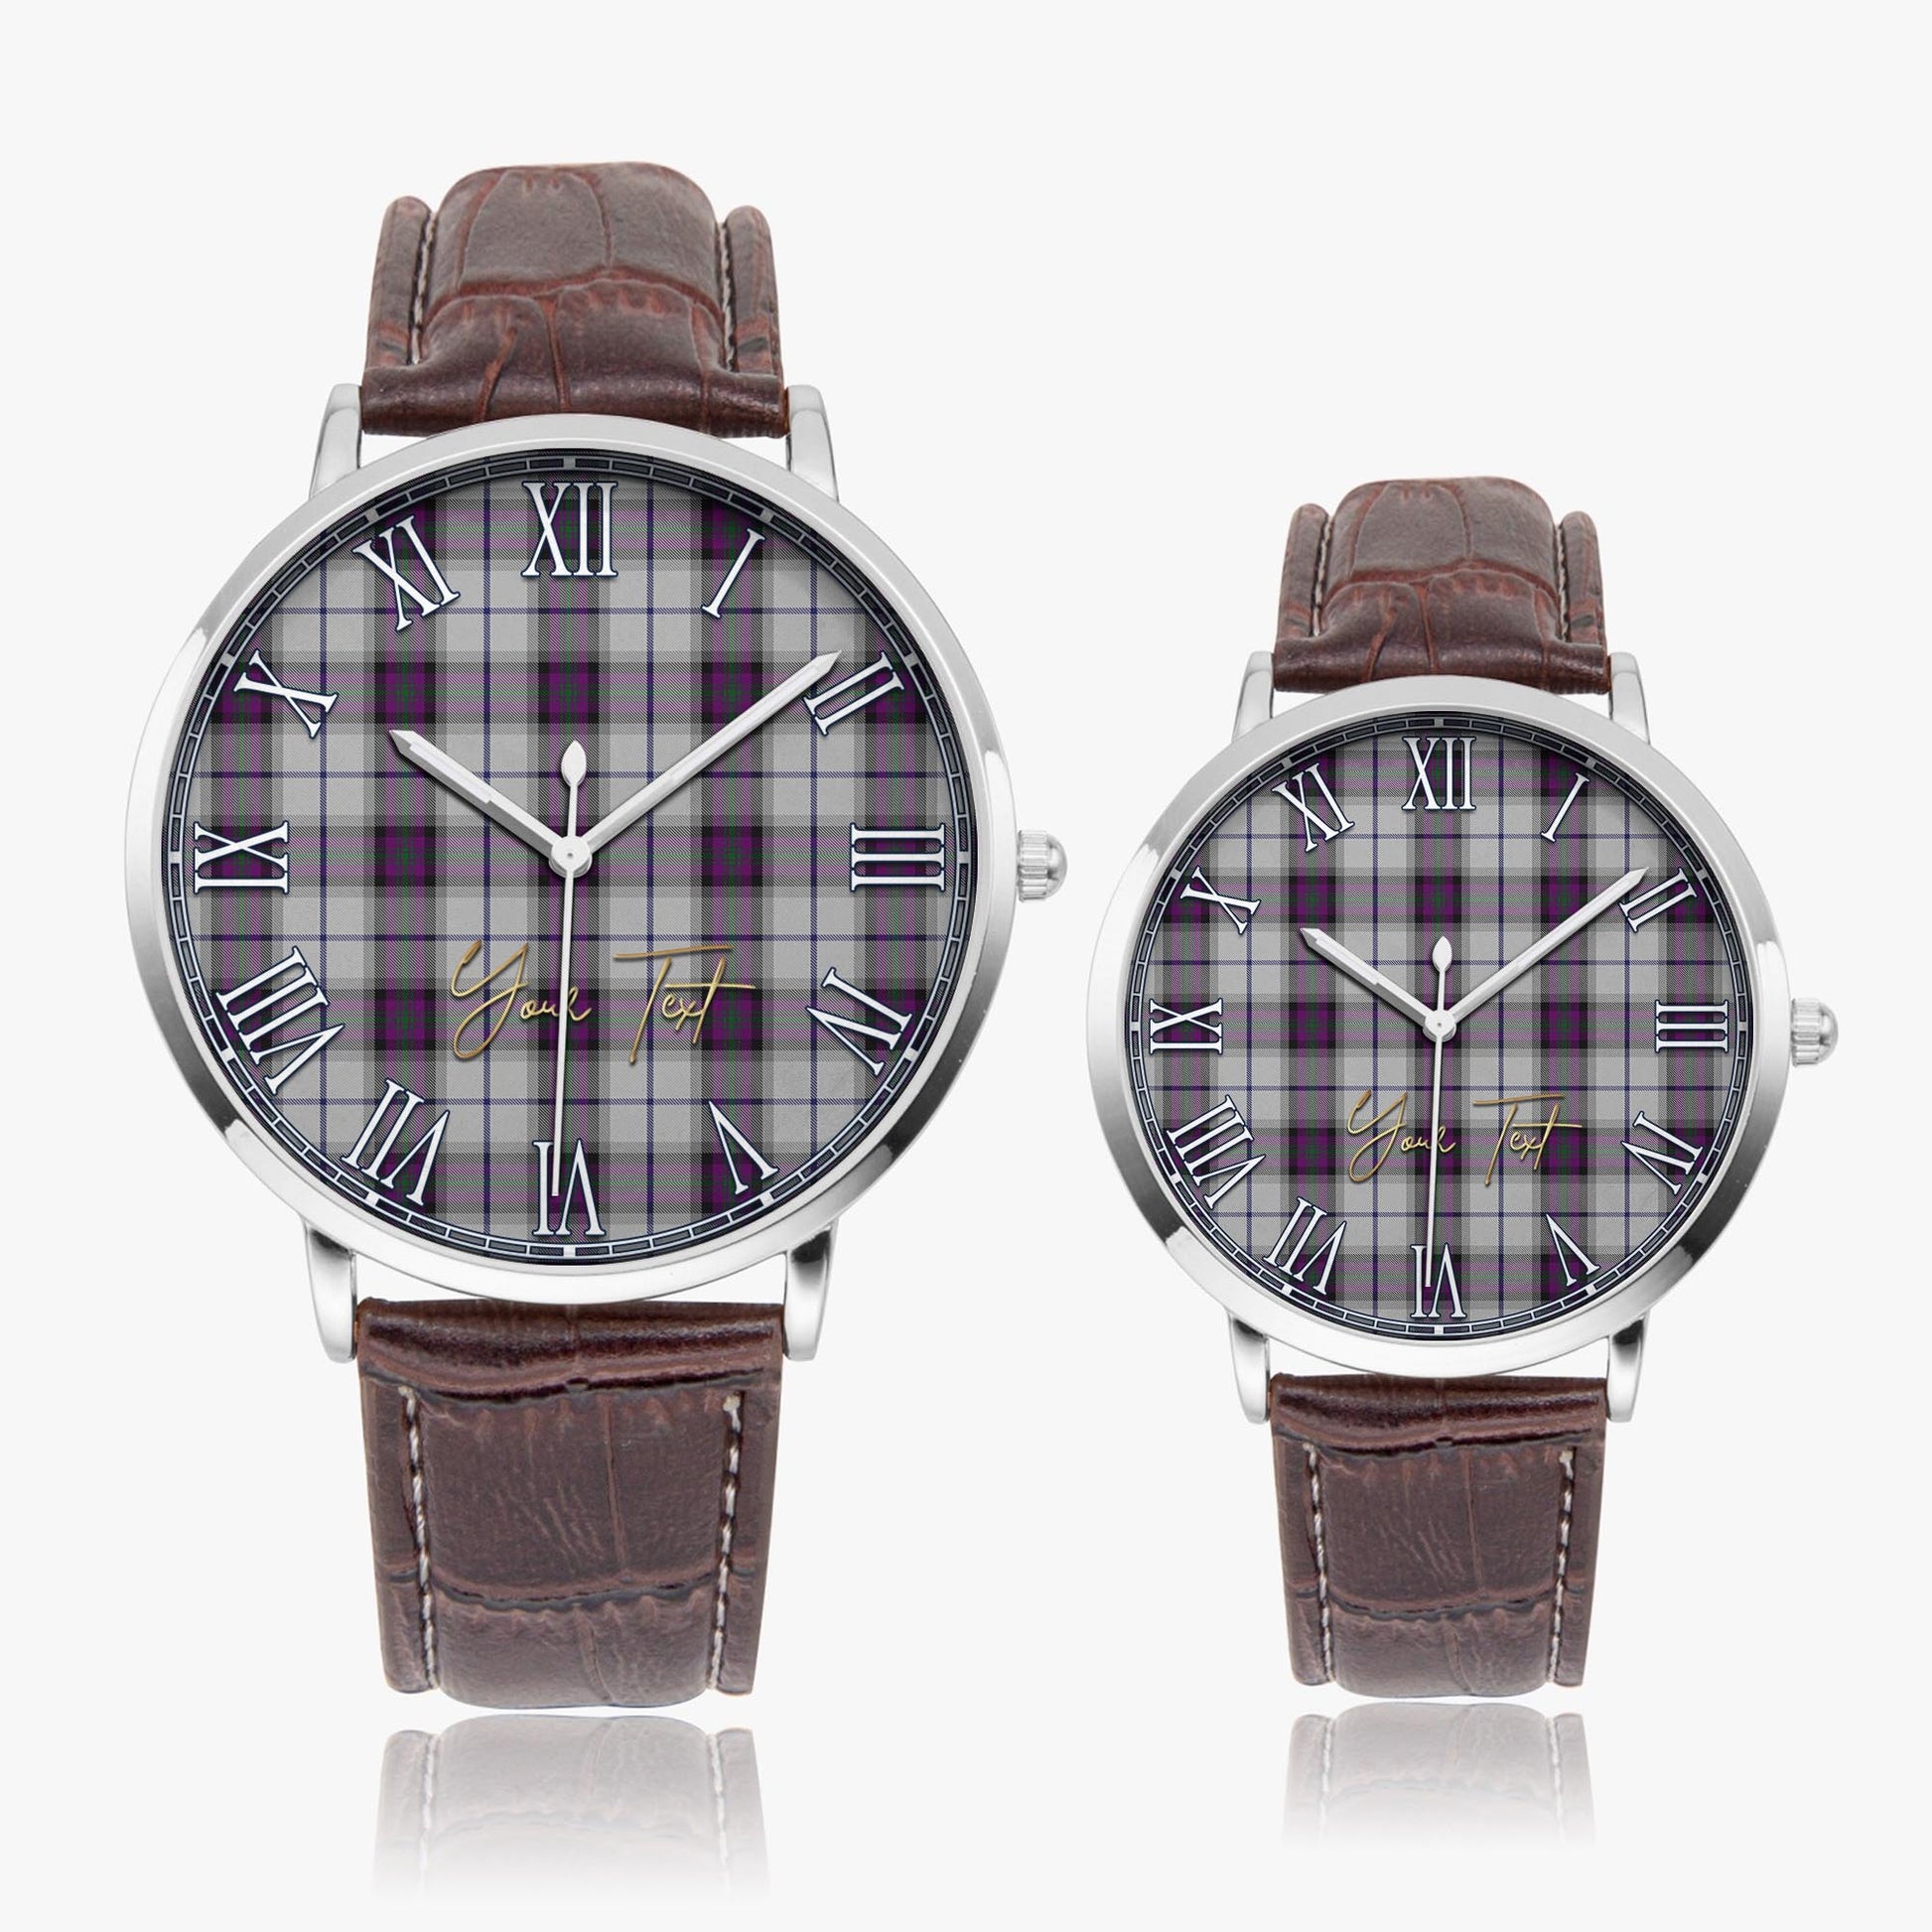 Alexander of Menstry Dress Tartan Personalized Your Text Leather Trap Quartz Watch Ultra Thin Silver Case With Brown Leather Strap - Tartanvibesclothing